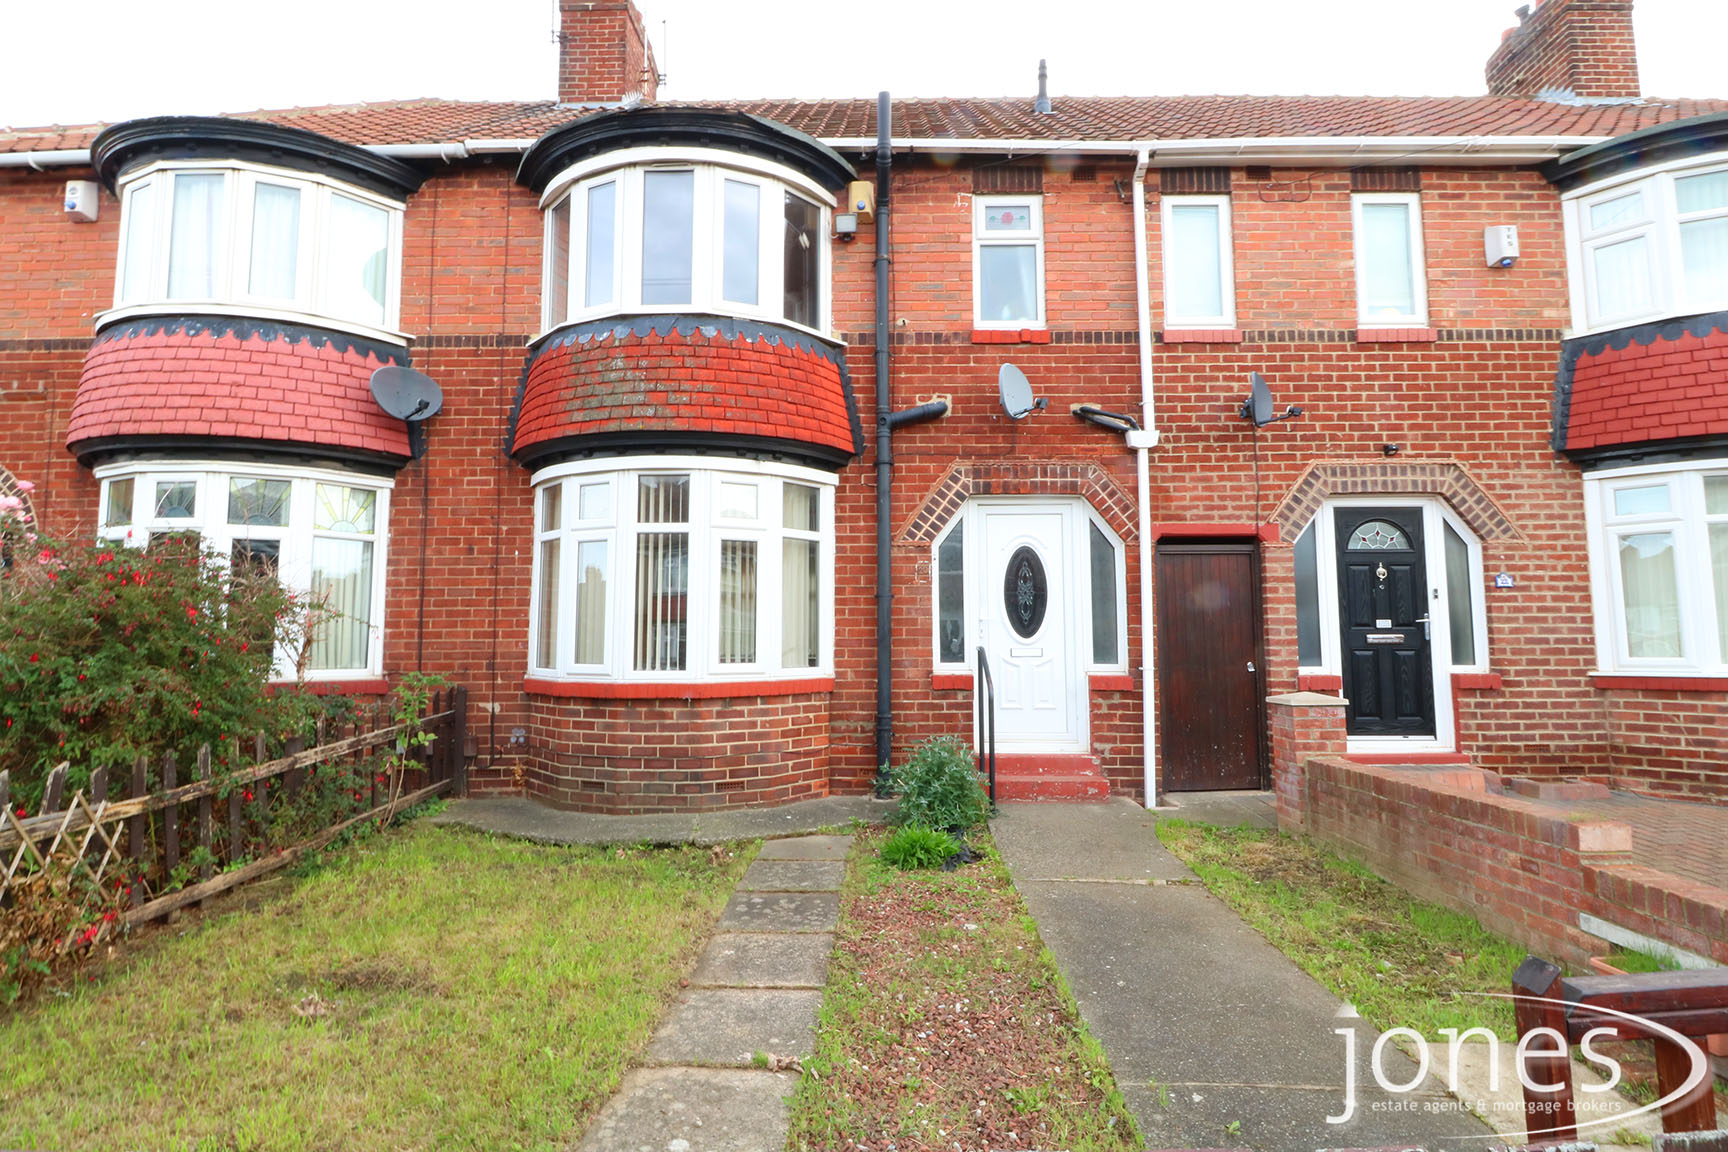 Home for Sale Let - Photo 01 Keithlands Avenue, Norton, Stockton on Tees, TS20